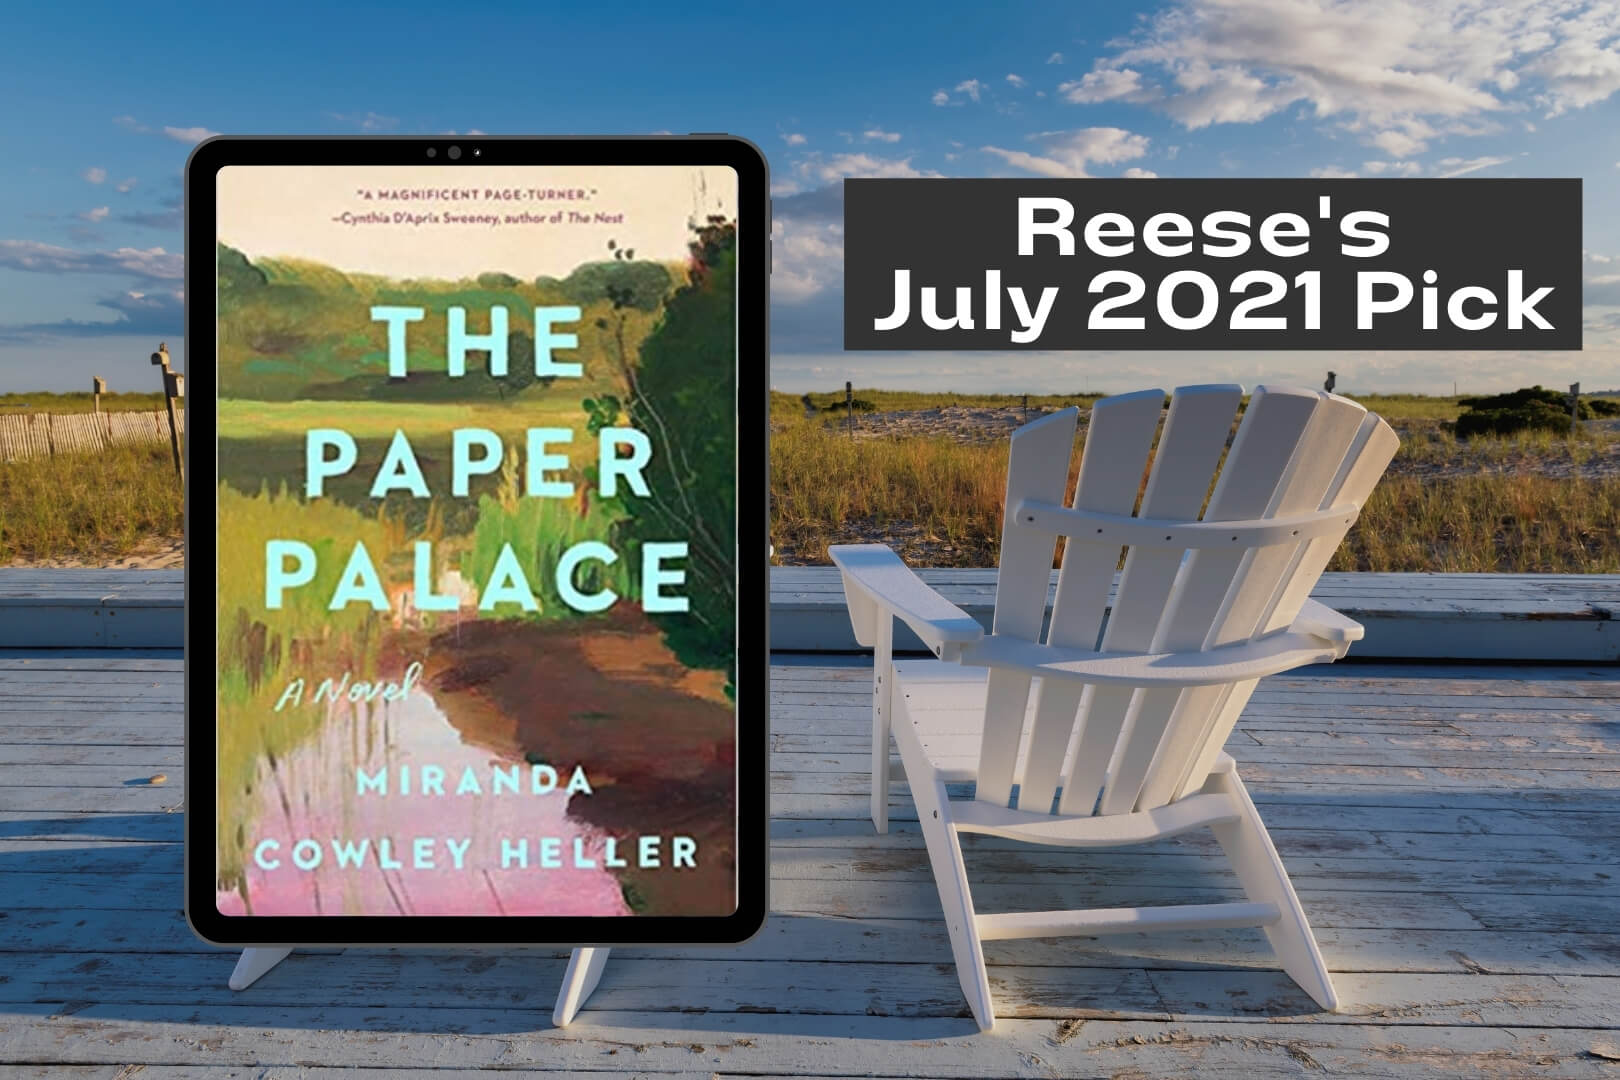 Reese’s July 2021 Book Club Pick is The Paper Palace by Miranda Cowley Heller